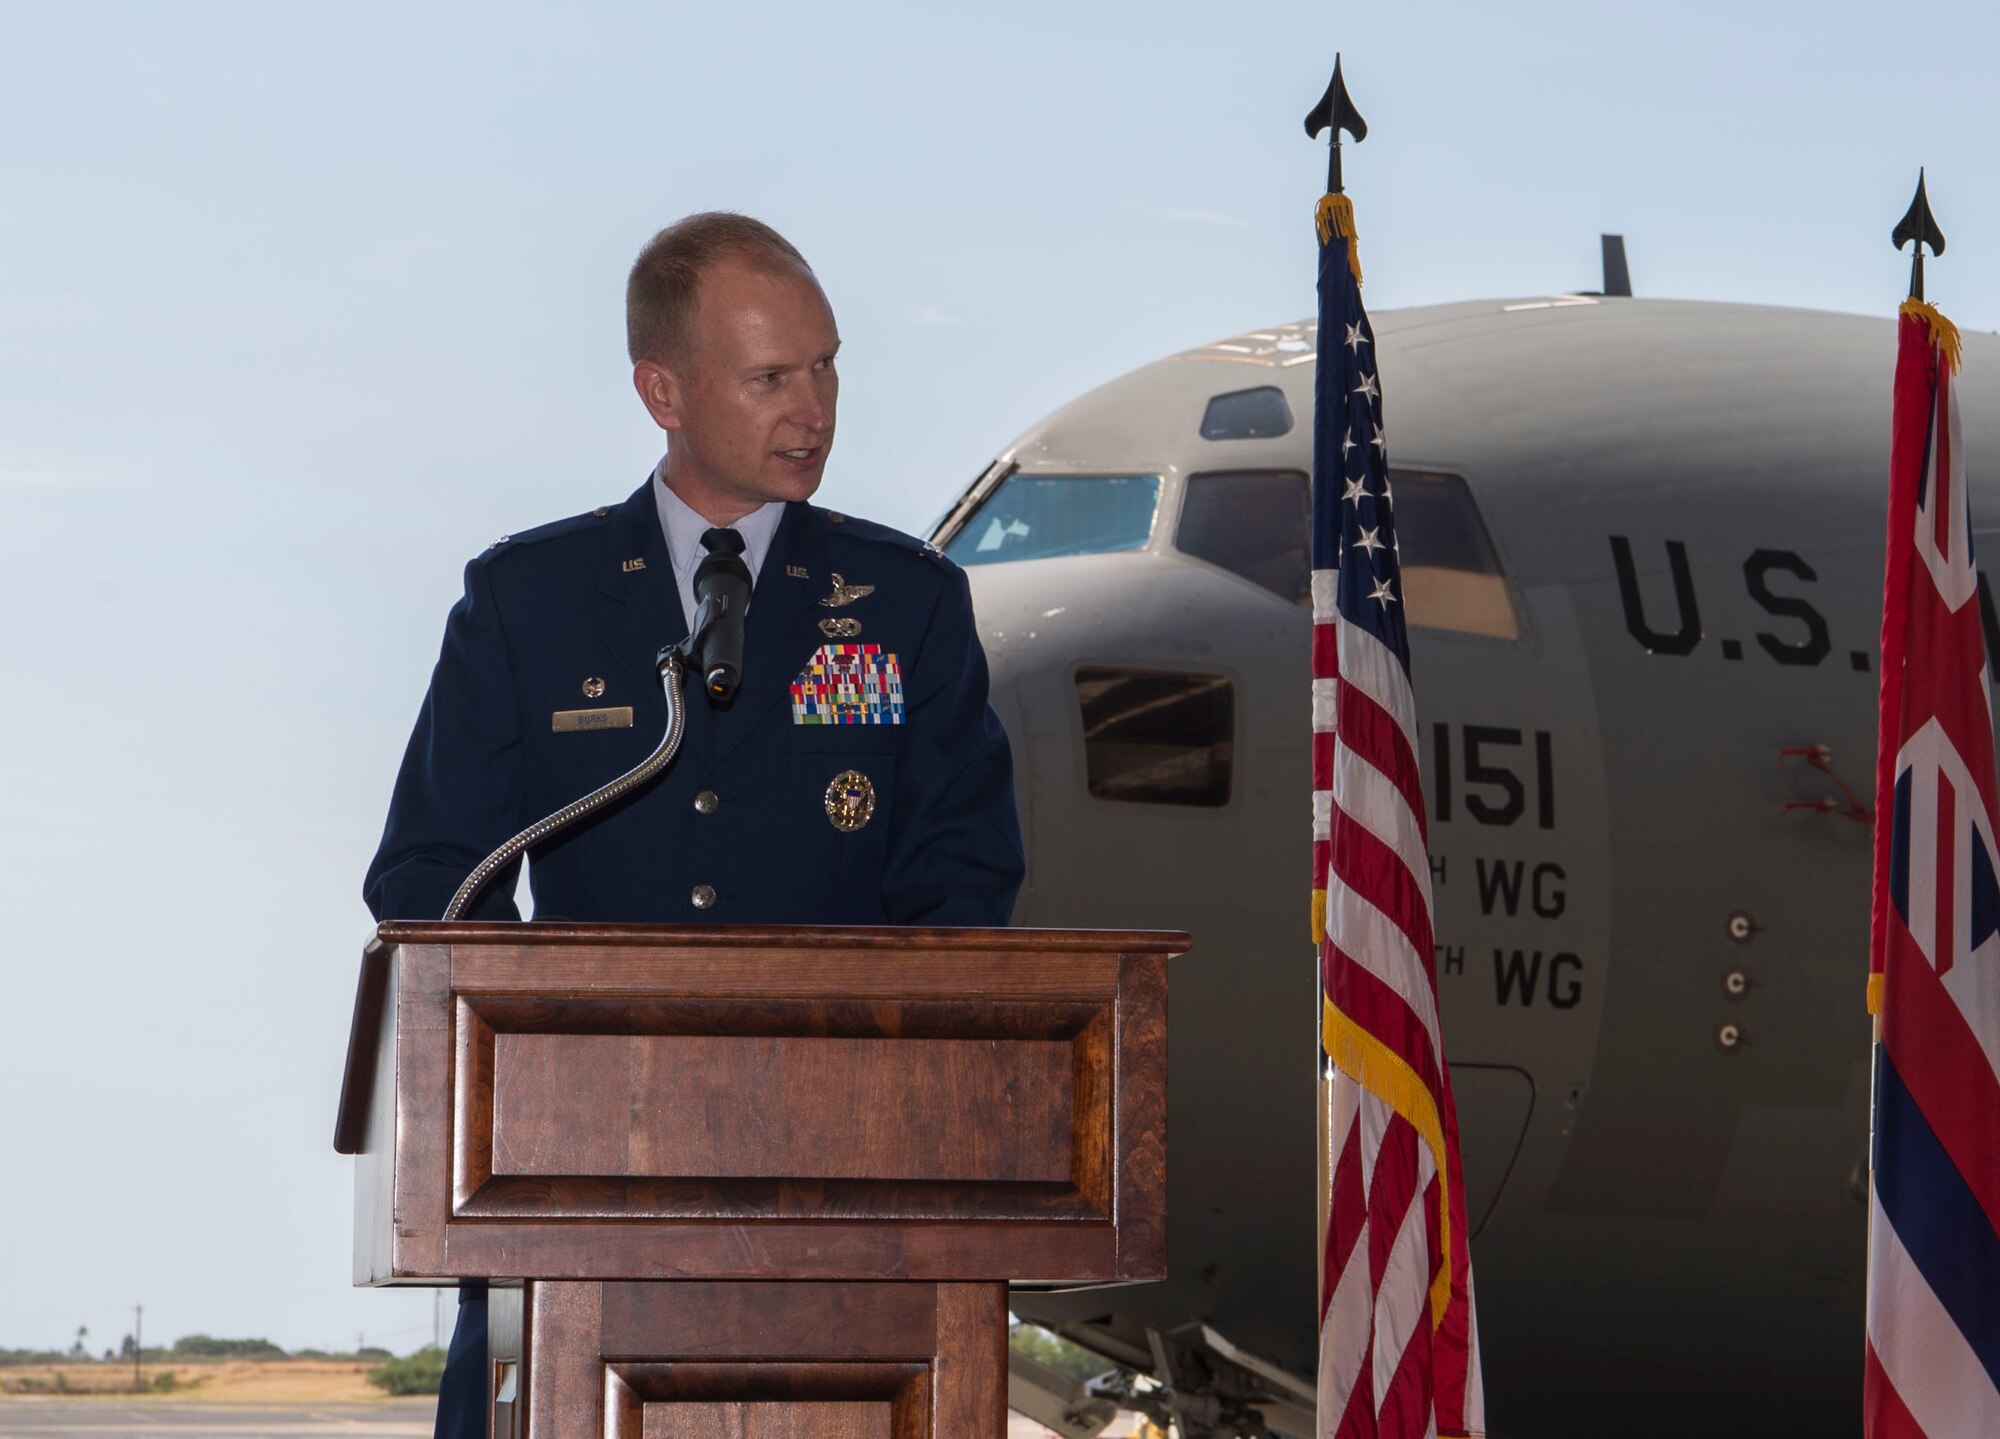 Col. Halsey Burks, 15th Wing commander, gives the opening comments during the 15th Maintenance Group change of command ceremony, Joint Base Pearl Harbor-Hickam, Hawaii, July 16, 2018. The MXG supports 31 home station aircraft to meet global airlift, global strike and theater security mission requirements and provides support to over 7,200 joint and allied aircraft transiting through Hickam Field each year. (U.S. Air Force photo by Tech. Sgt. Heather Redman)